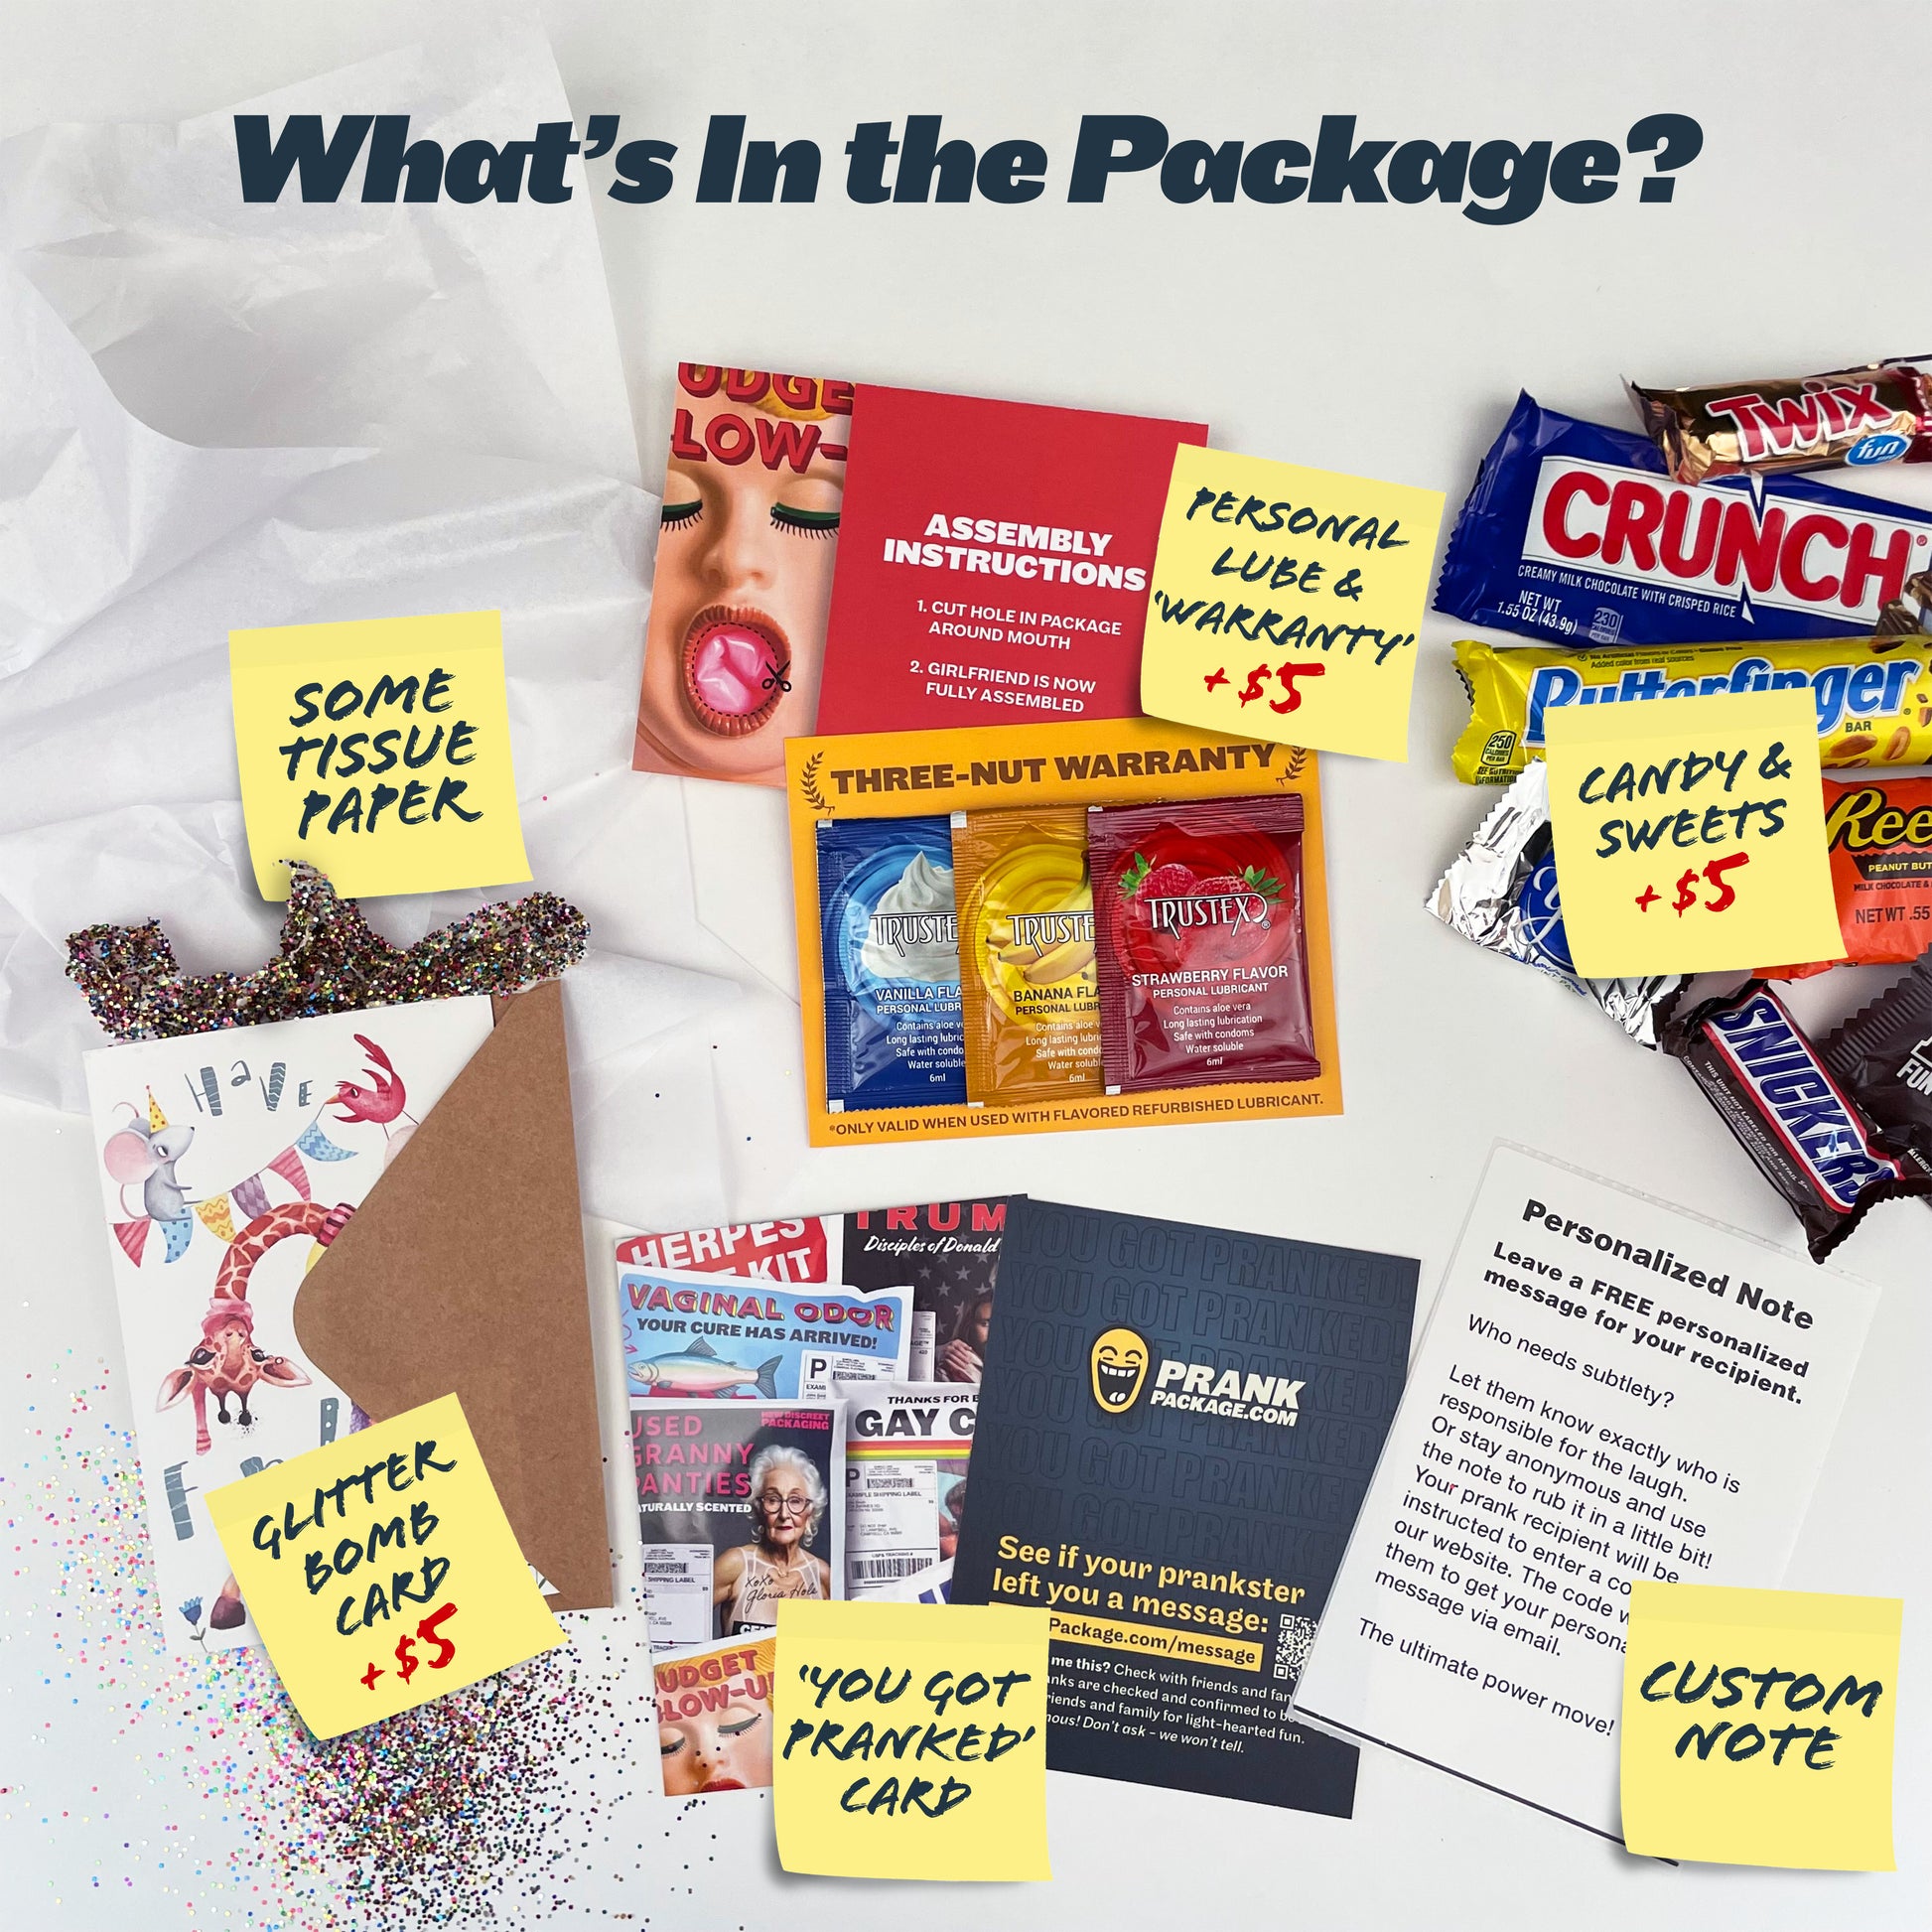 What's in the package? Some tissue paper, optional glitter bomb greeting card, custom note for your recipient, 'You Got Pranked' card, optional candy, and optional packets of flavored lube on a '3-Nut Warranty' card.